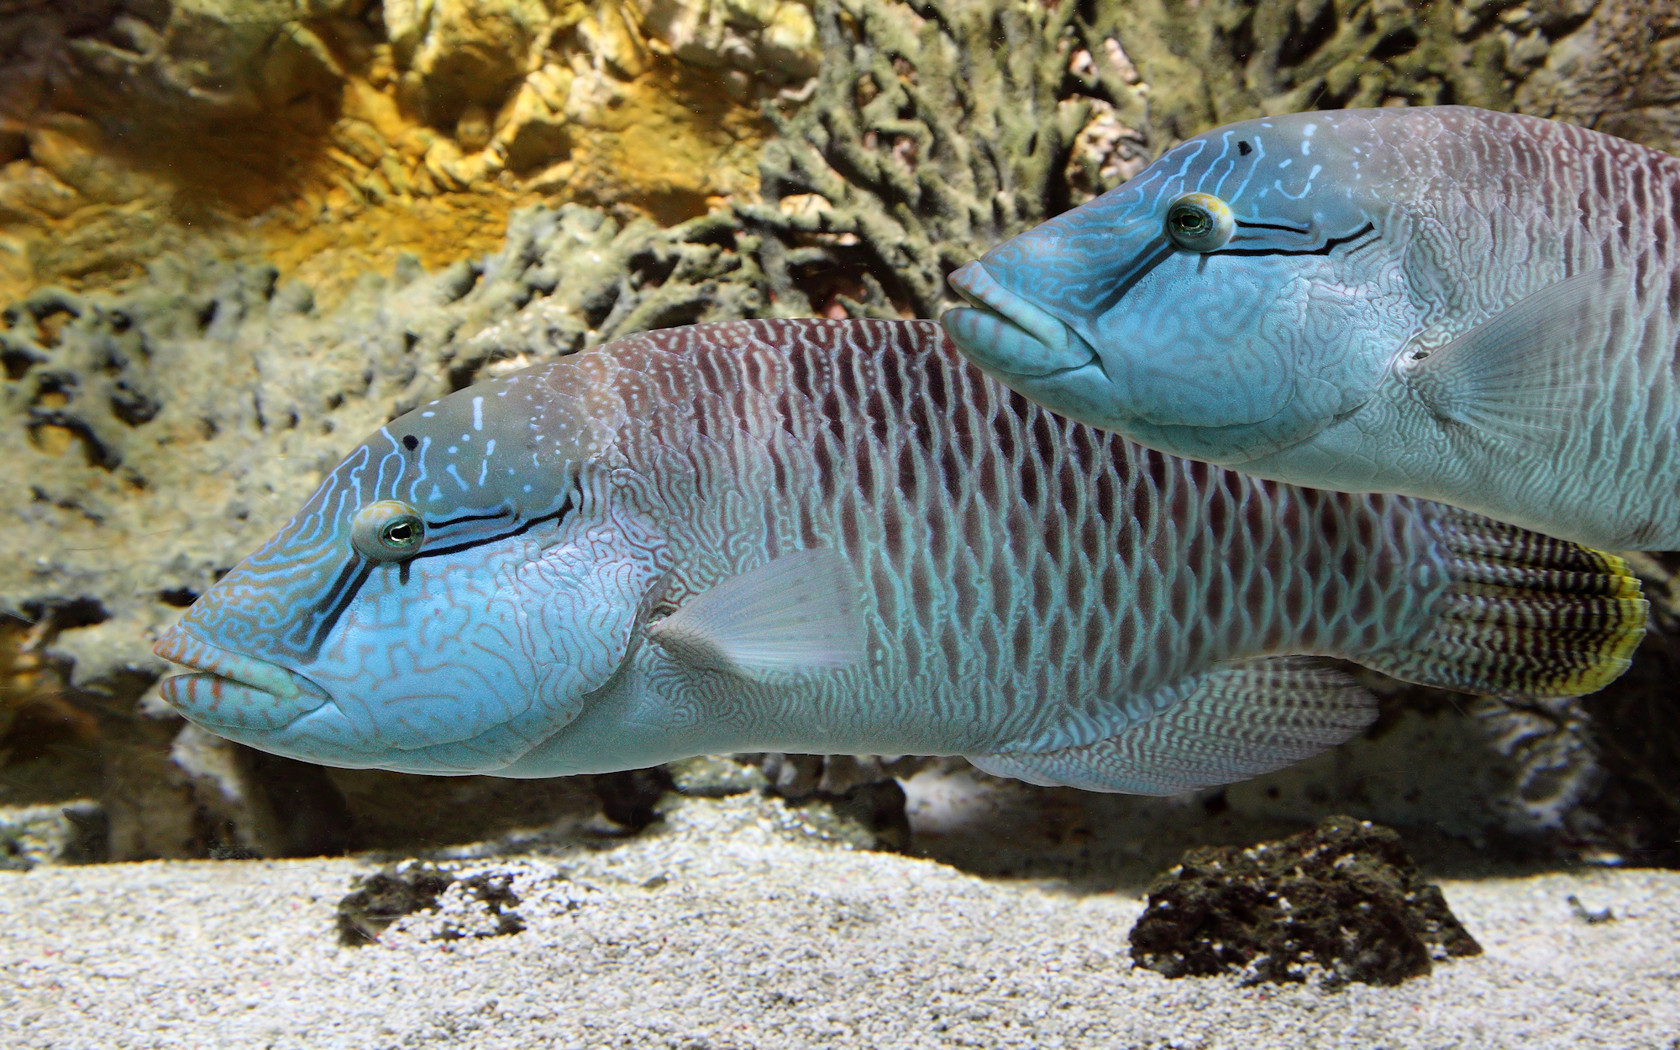 Humphead wrasse swimming in turquoise waters.